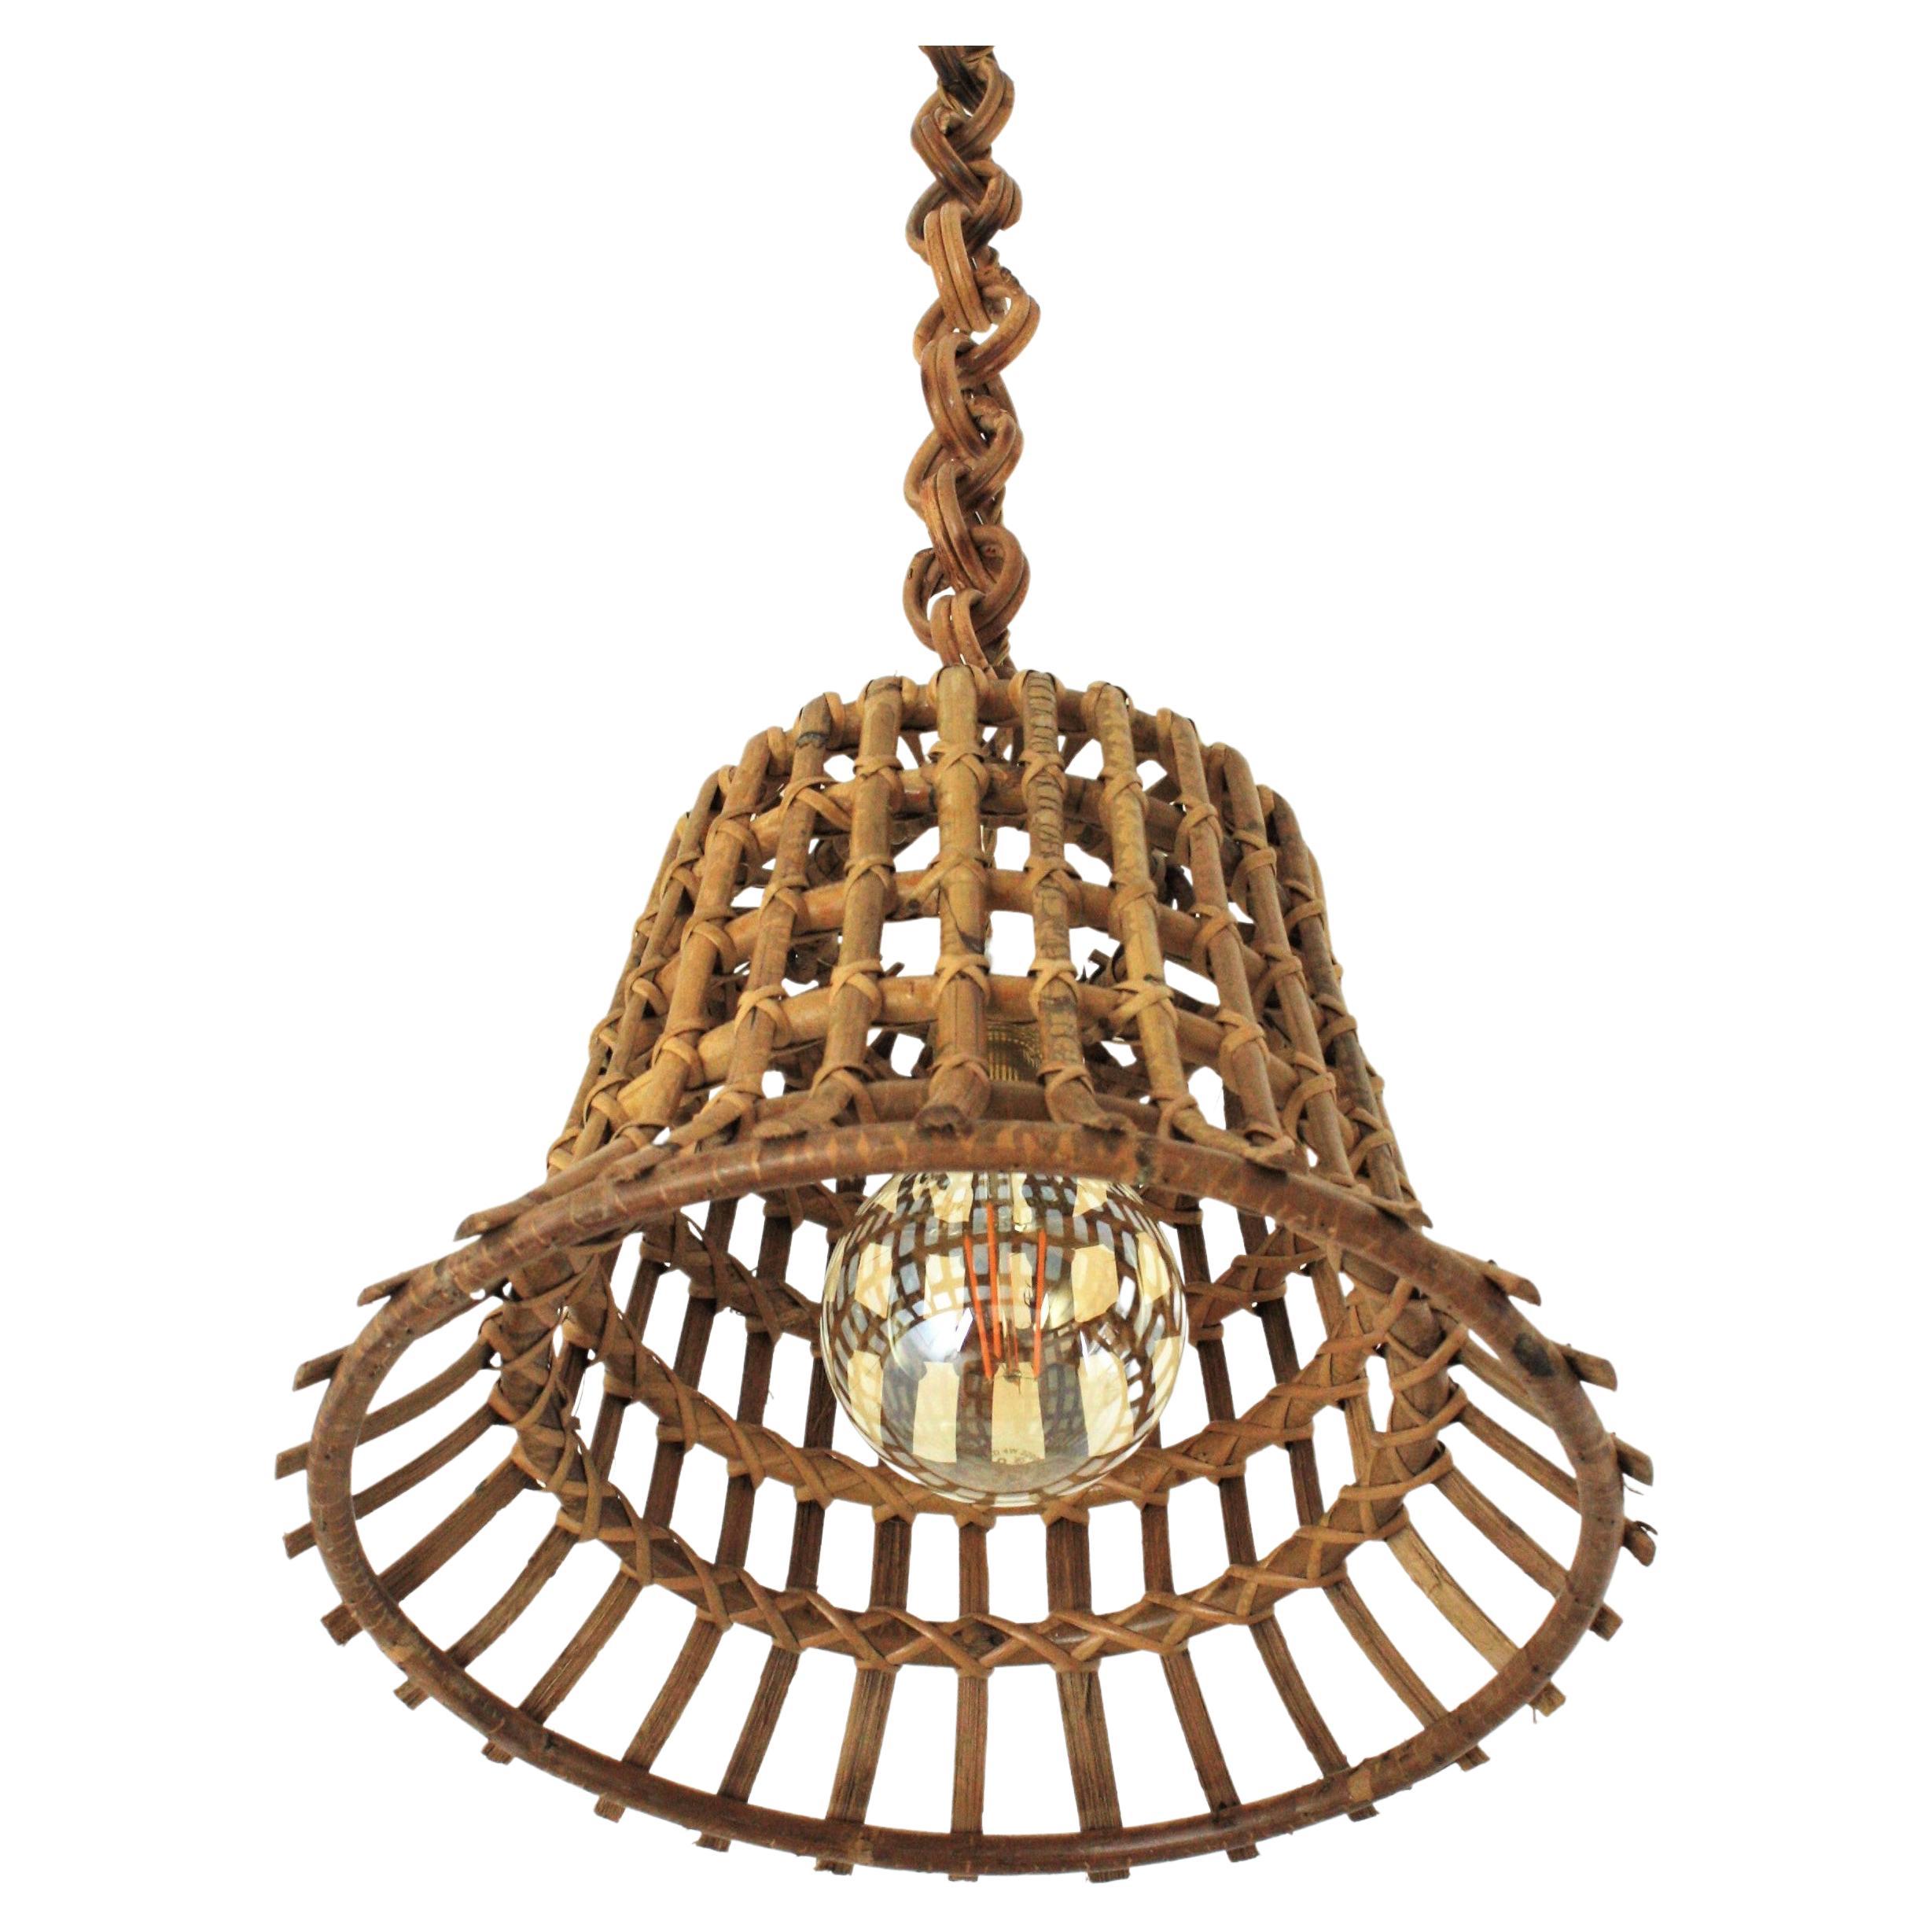 French Riviera large pendant light in rattan with grid basket design, 1960s
This gorgeous suspension lamp has a basket or bell shape lampshade made of an intrincate of rattan canes as a grid. It hangs from a chain with double rattan round links.